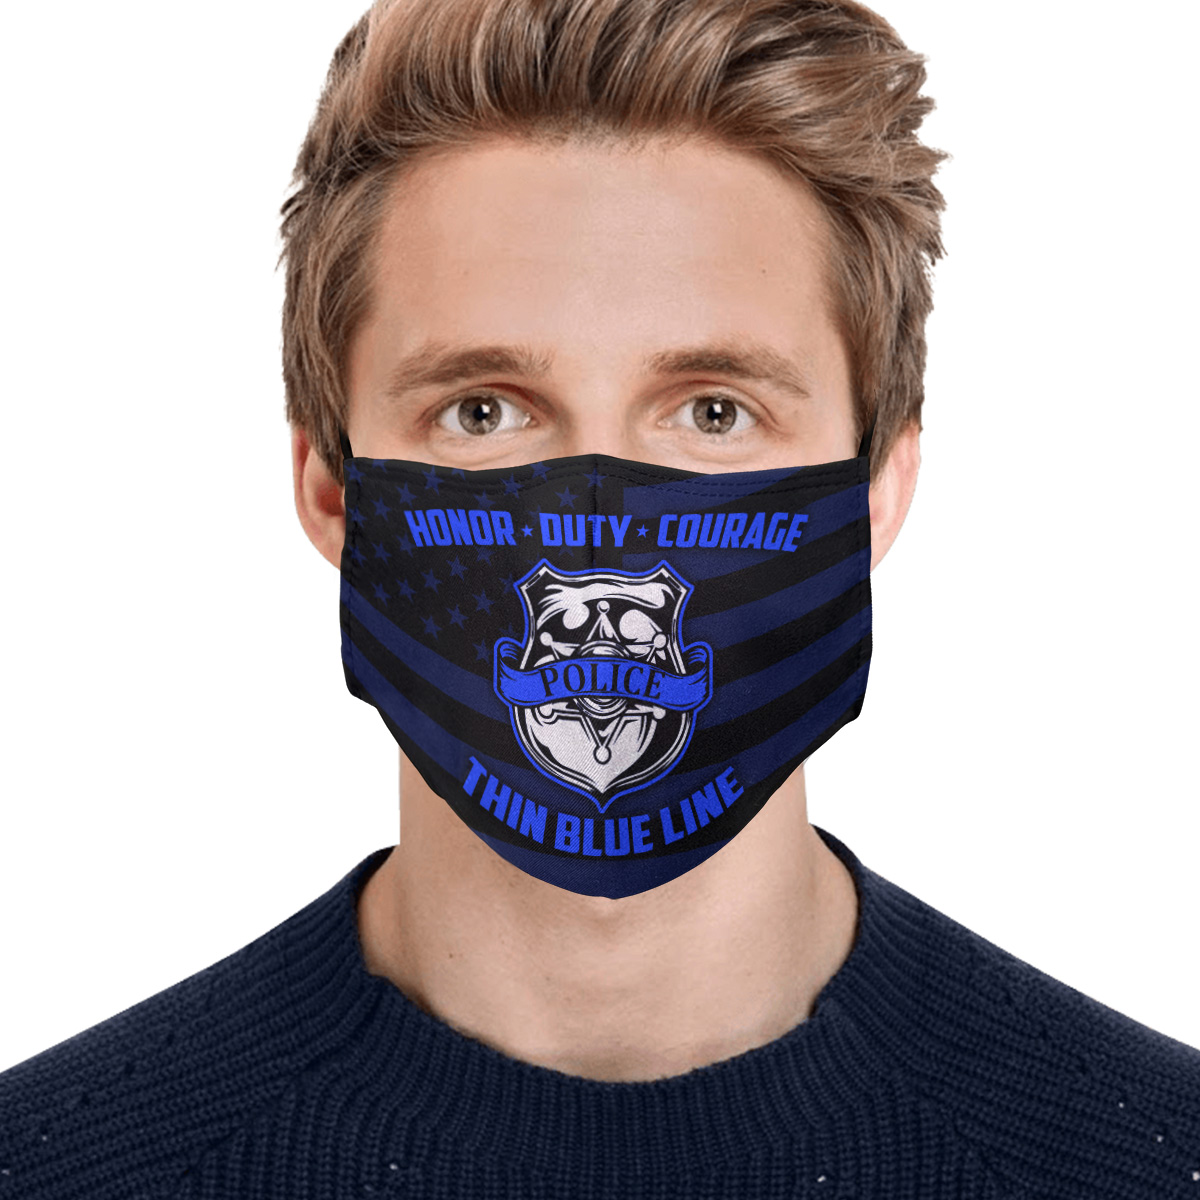 Honor duty courage police back thin blue line face mask 1